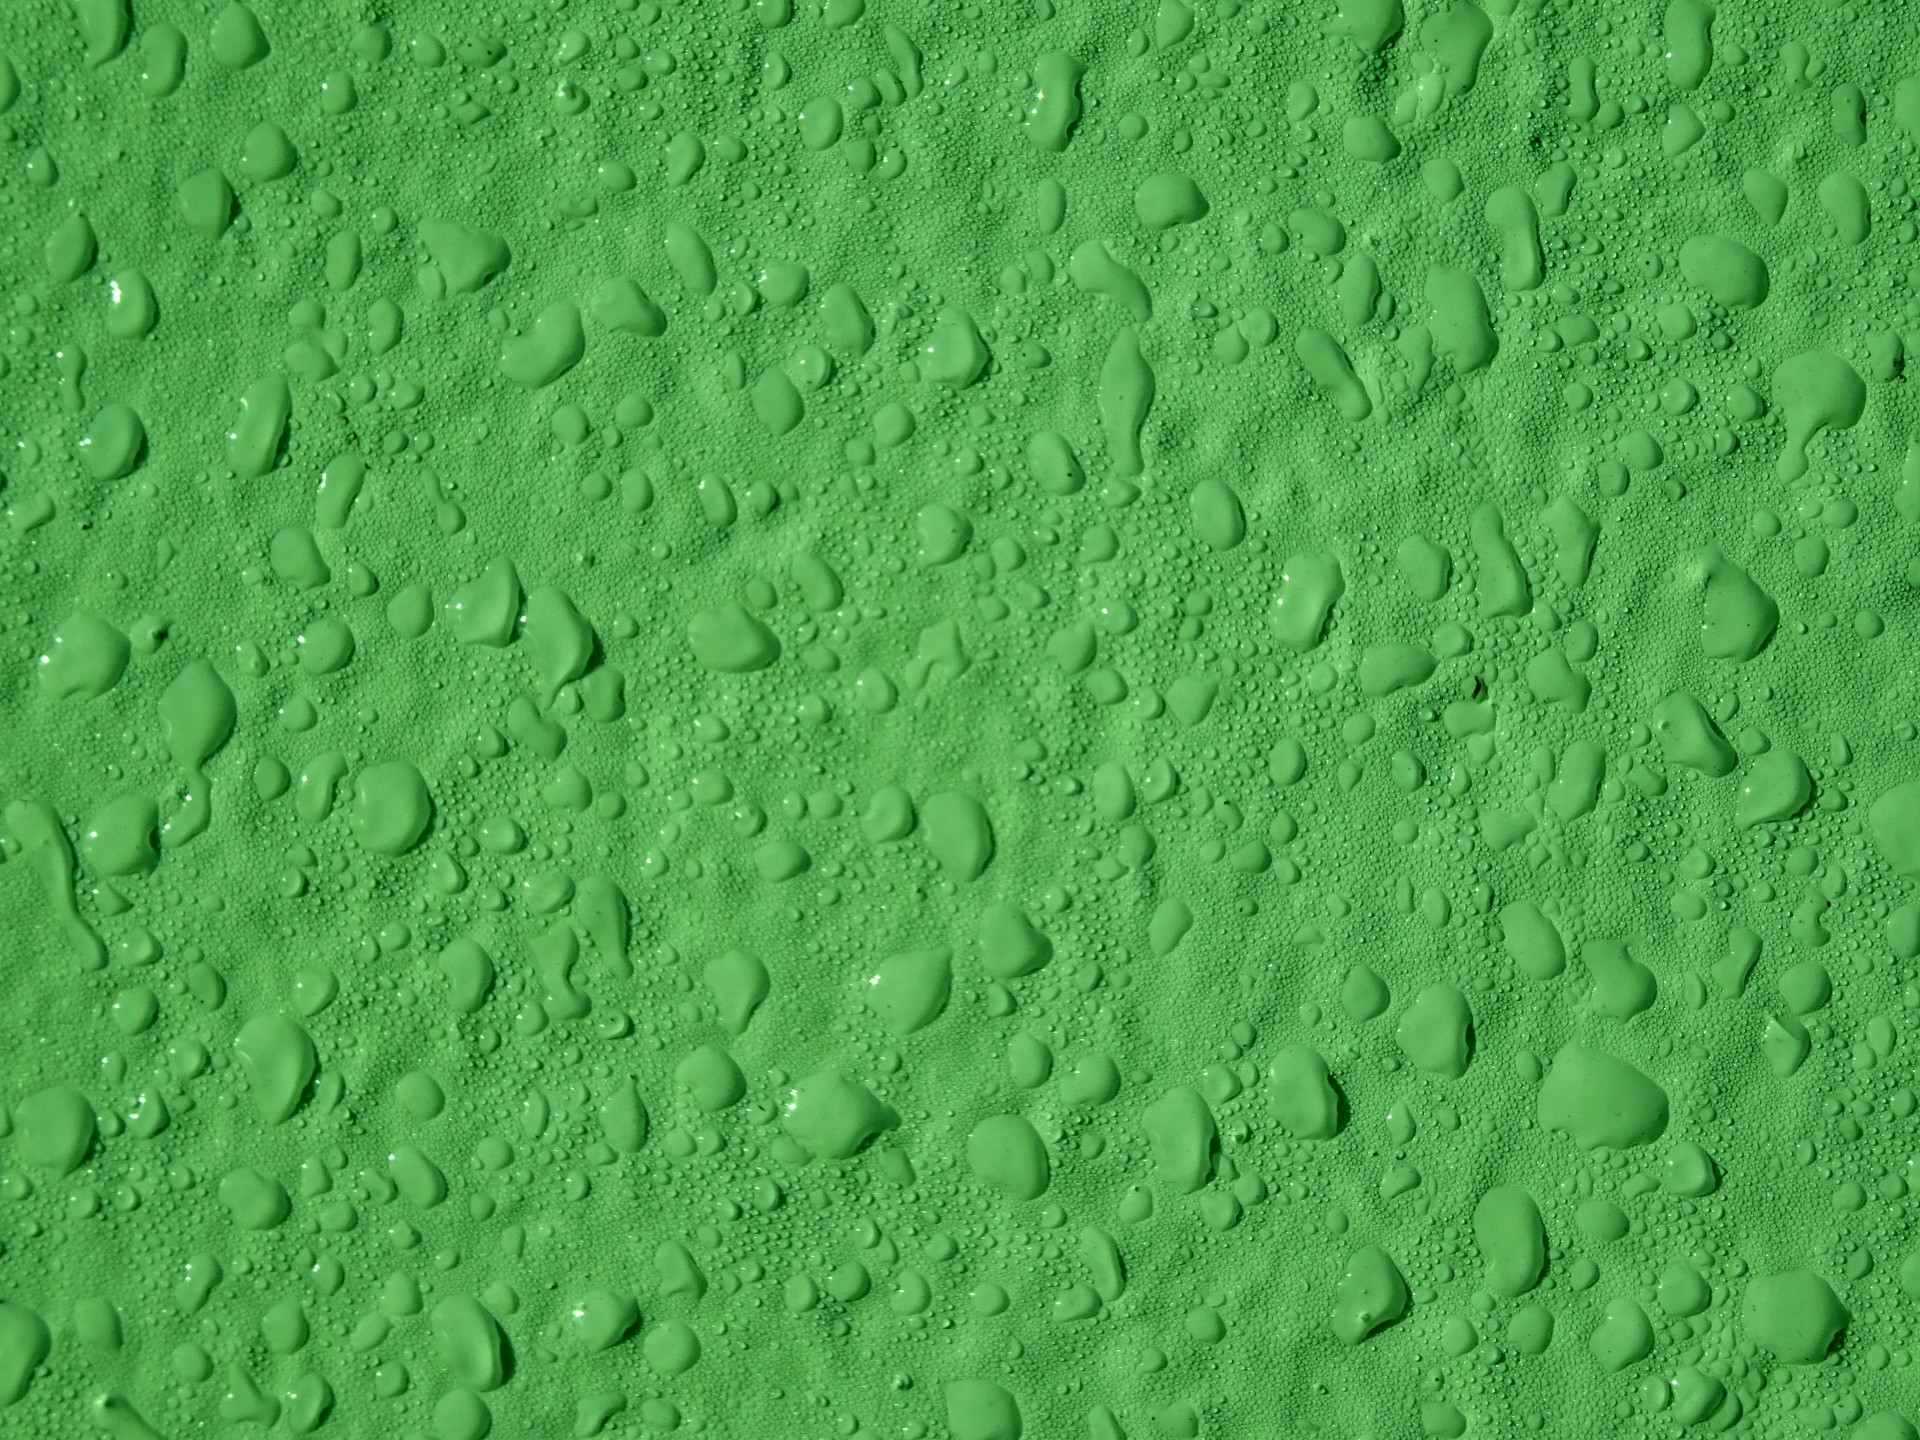 1920x1440 Green Water Droplets Background